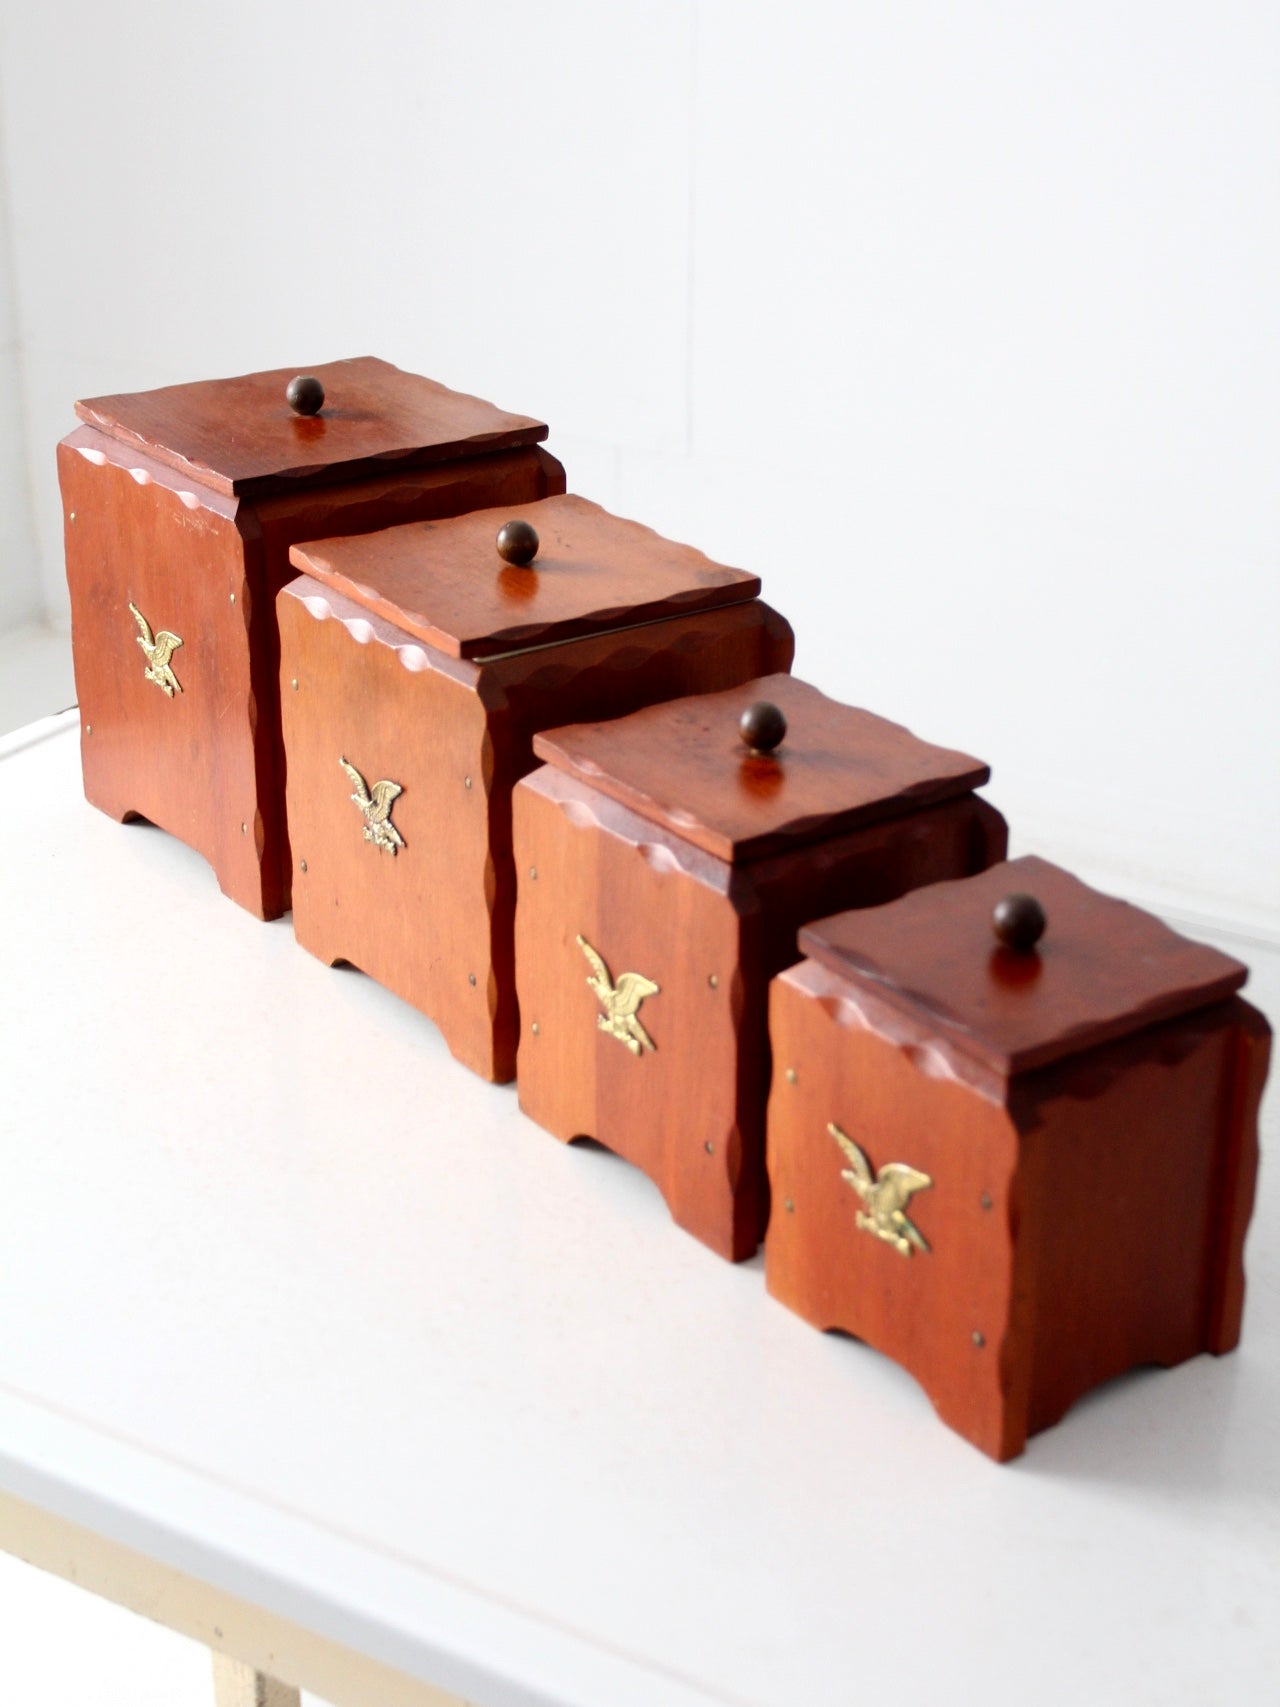 vintage wooden canisters, set of 4